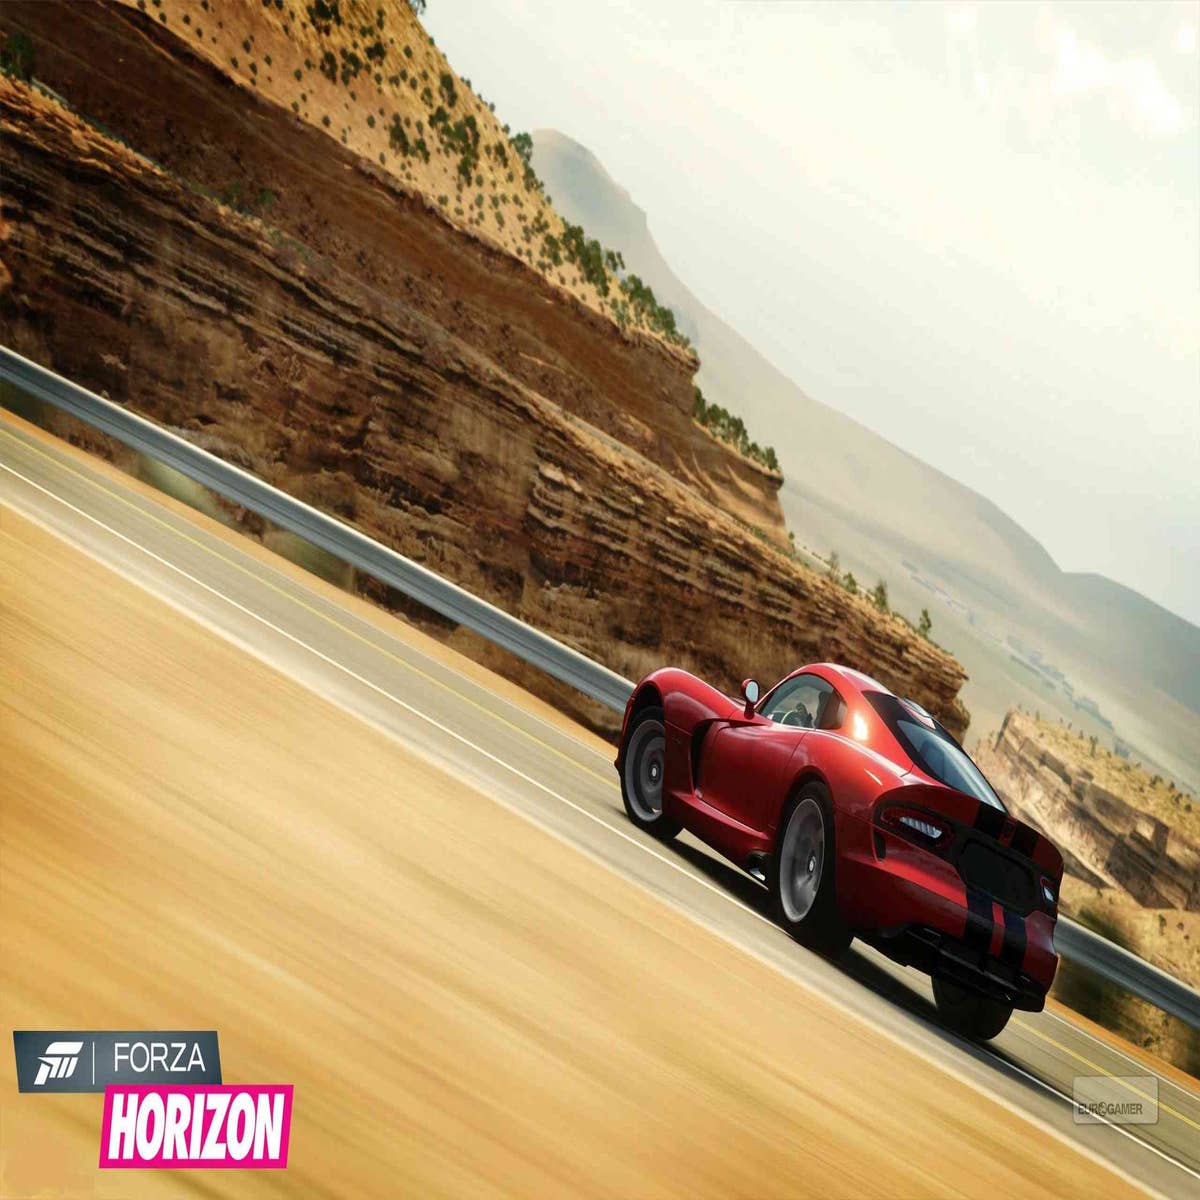 Forza Motorsport 4 demo meets the world